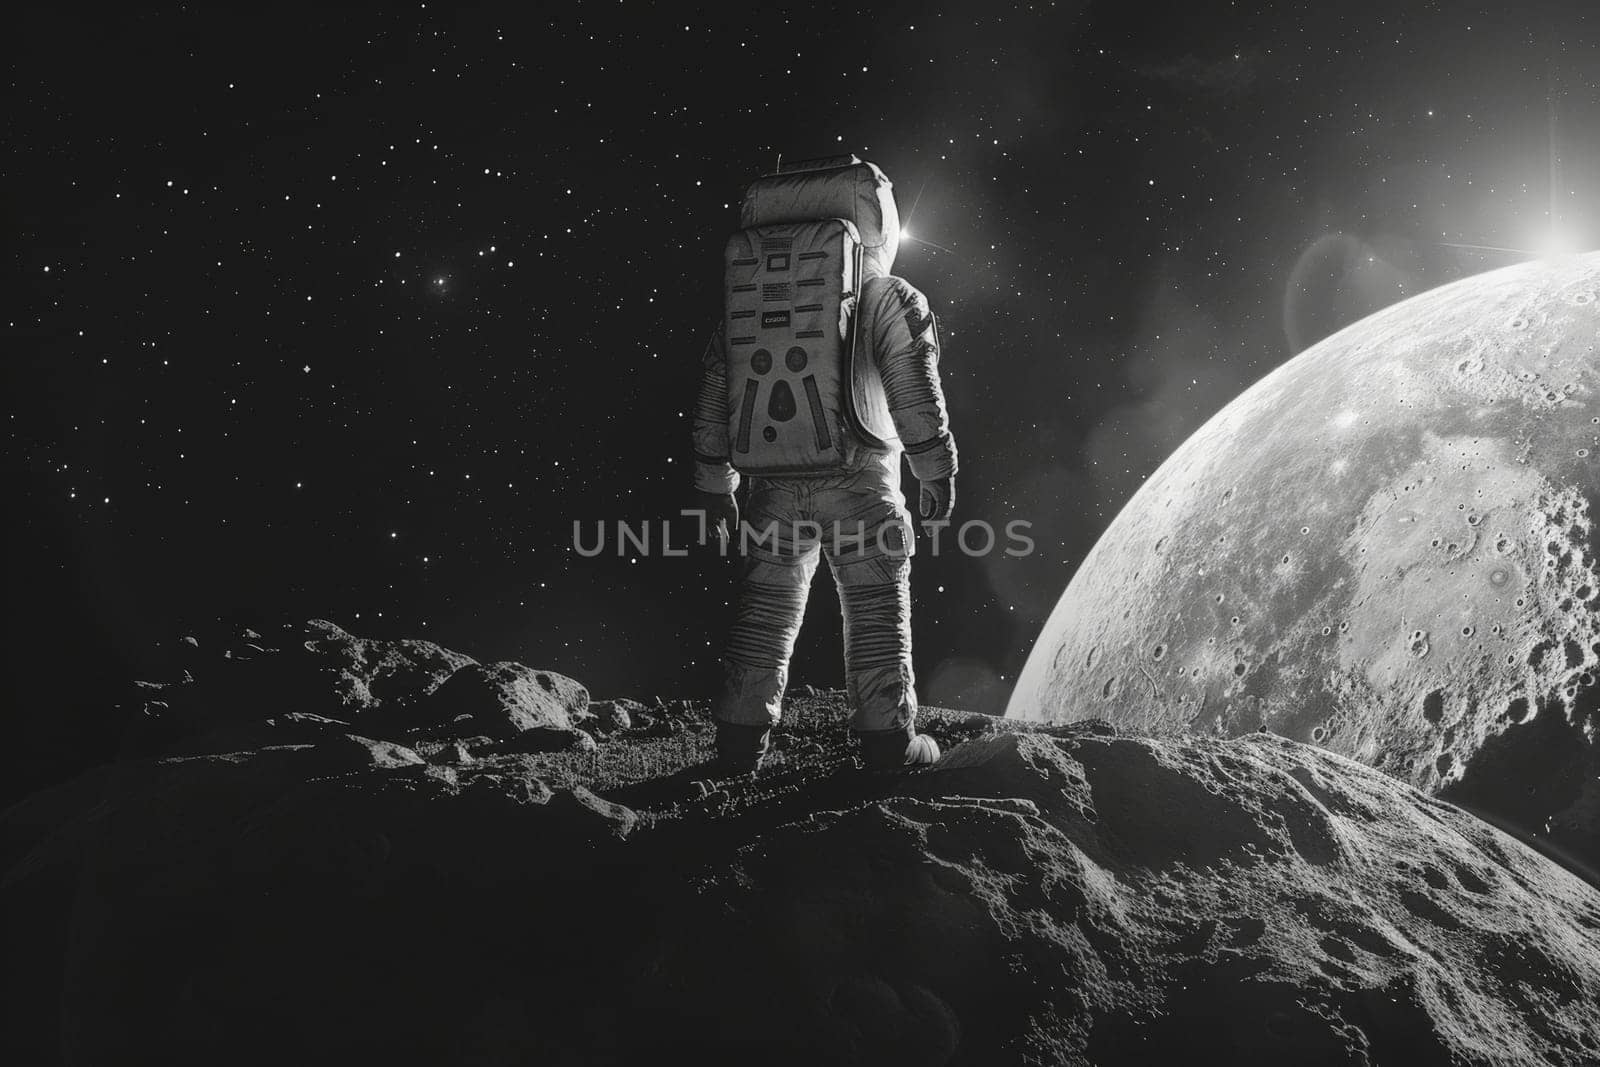 A man in a spacesuit stands on a rocky surface looking up at a large planet. The image has a sense of wonder and exploration, as the man is in a space suit and he is an astronaut